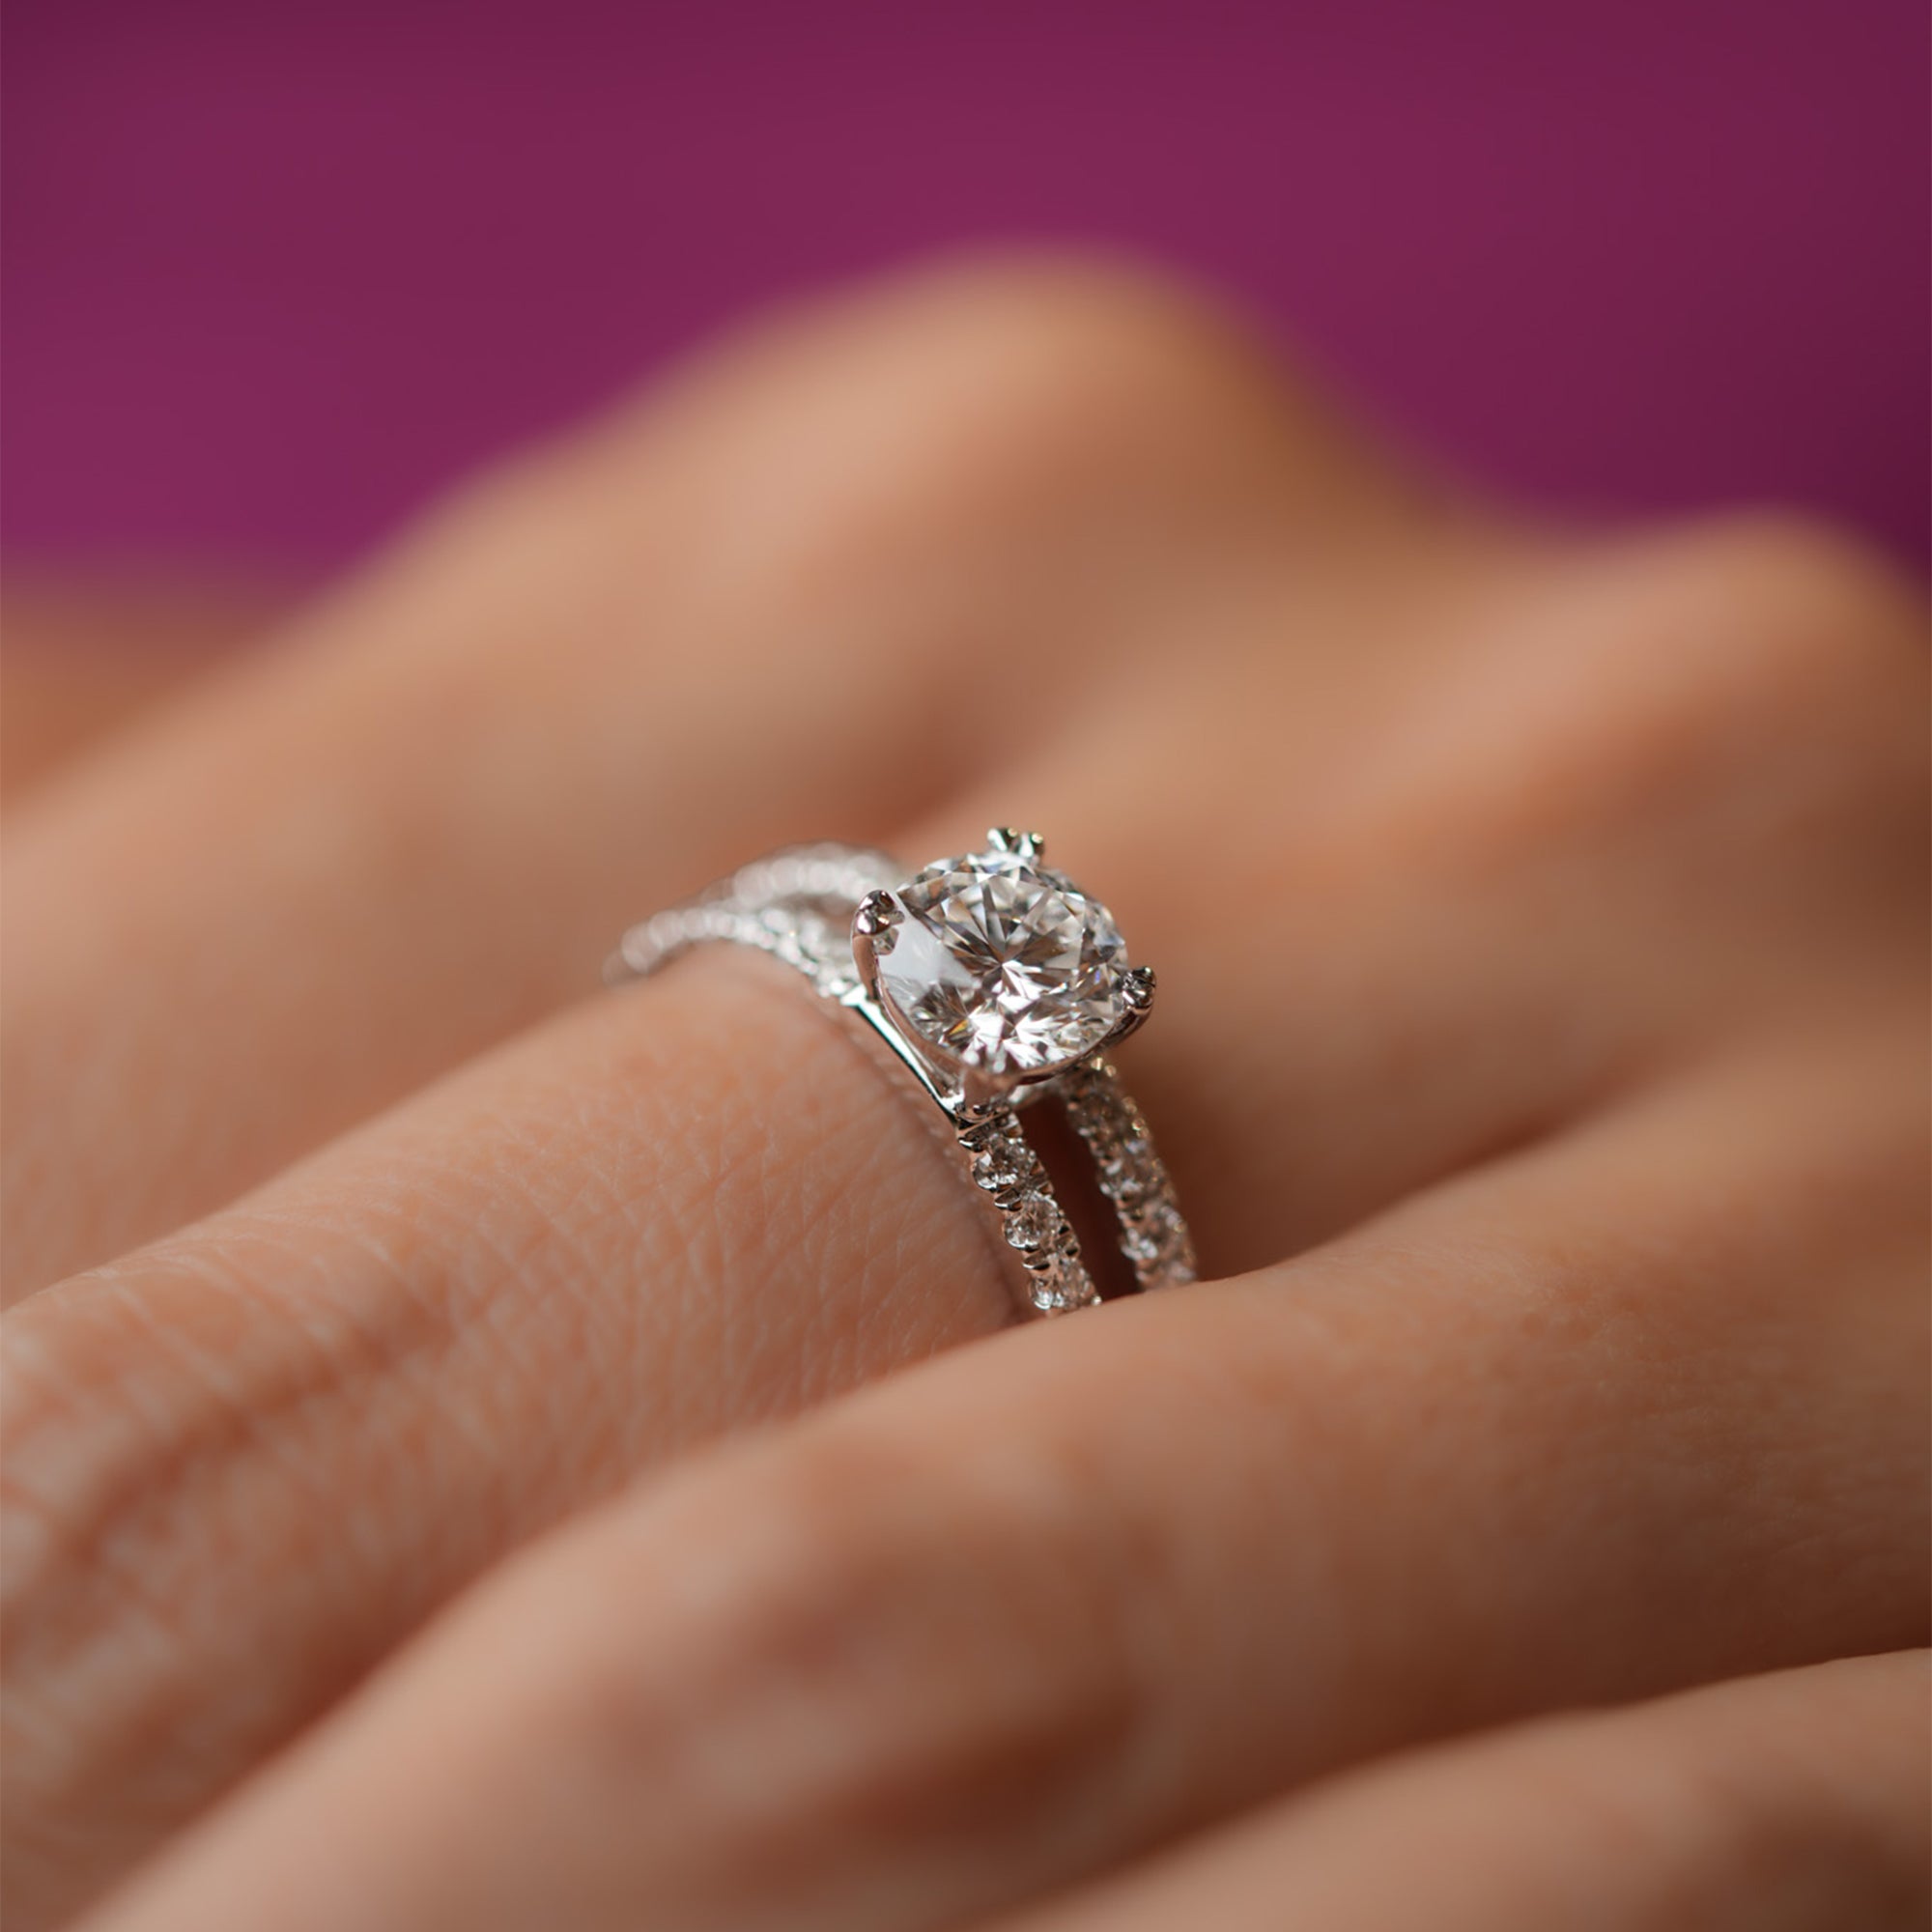 Solitaire 1 carat Diamond Ring in White Gold